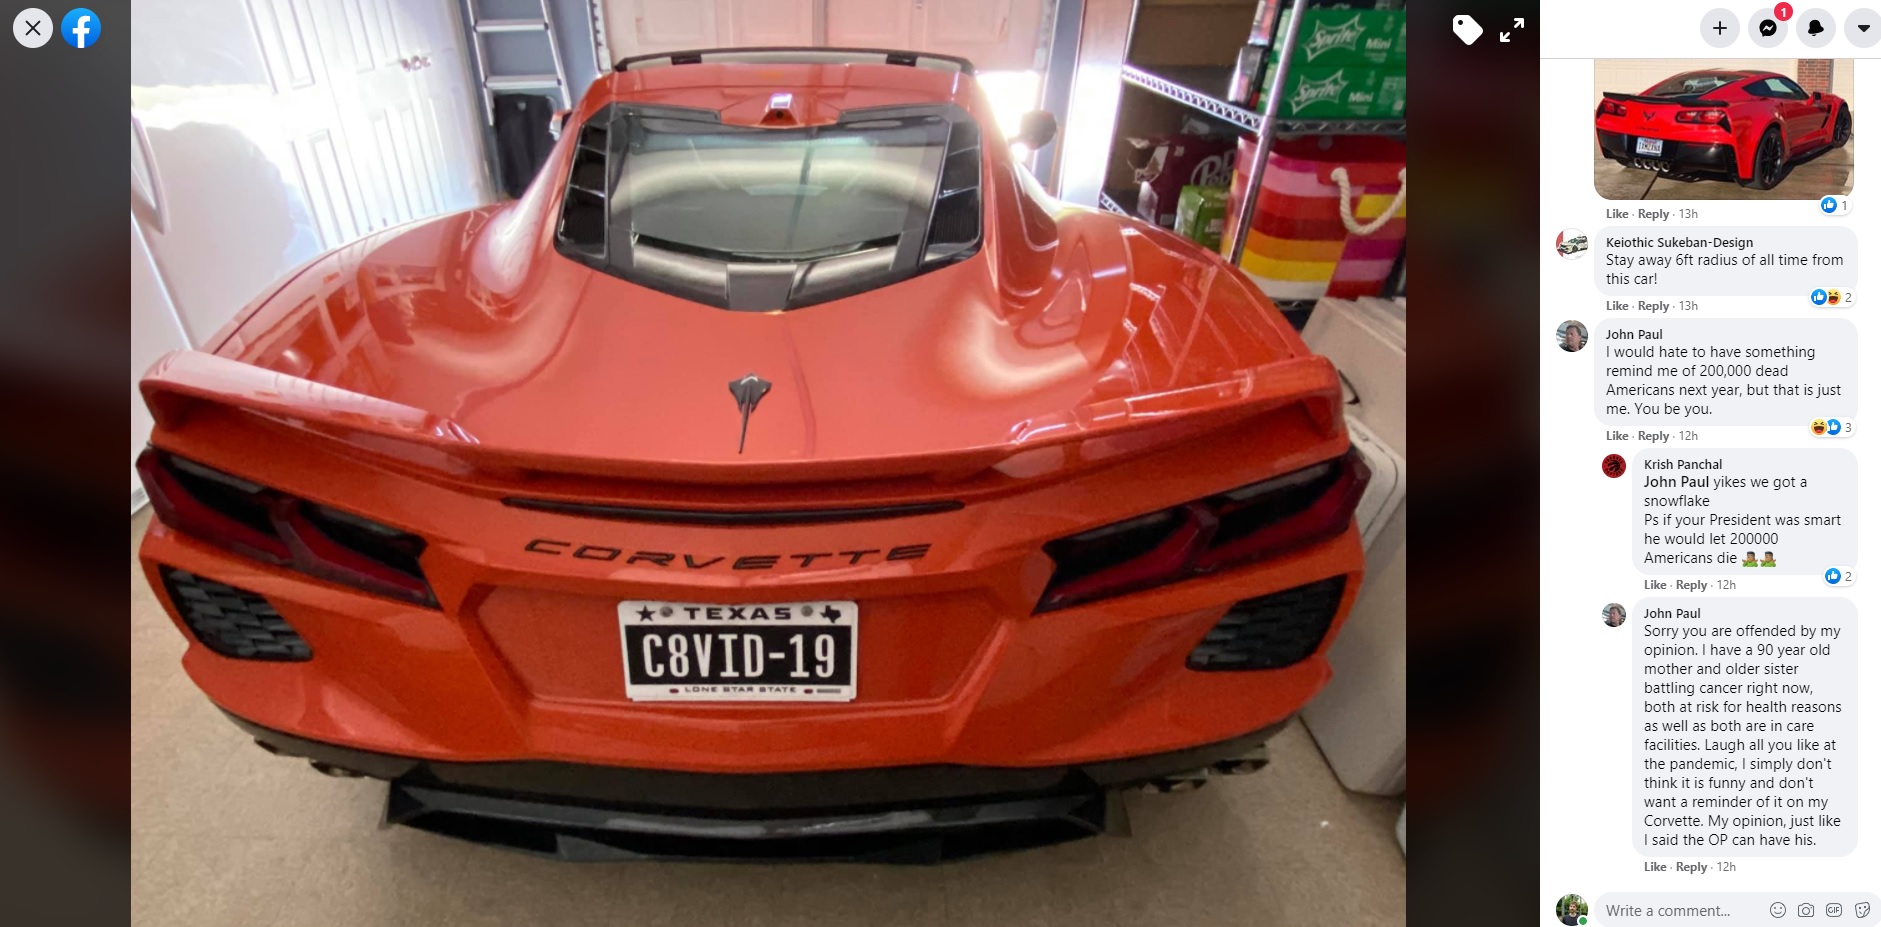 c8-corvette-owner-gets-personalized-license-plate-that-will-split-opinion-147463_1.jpg